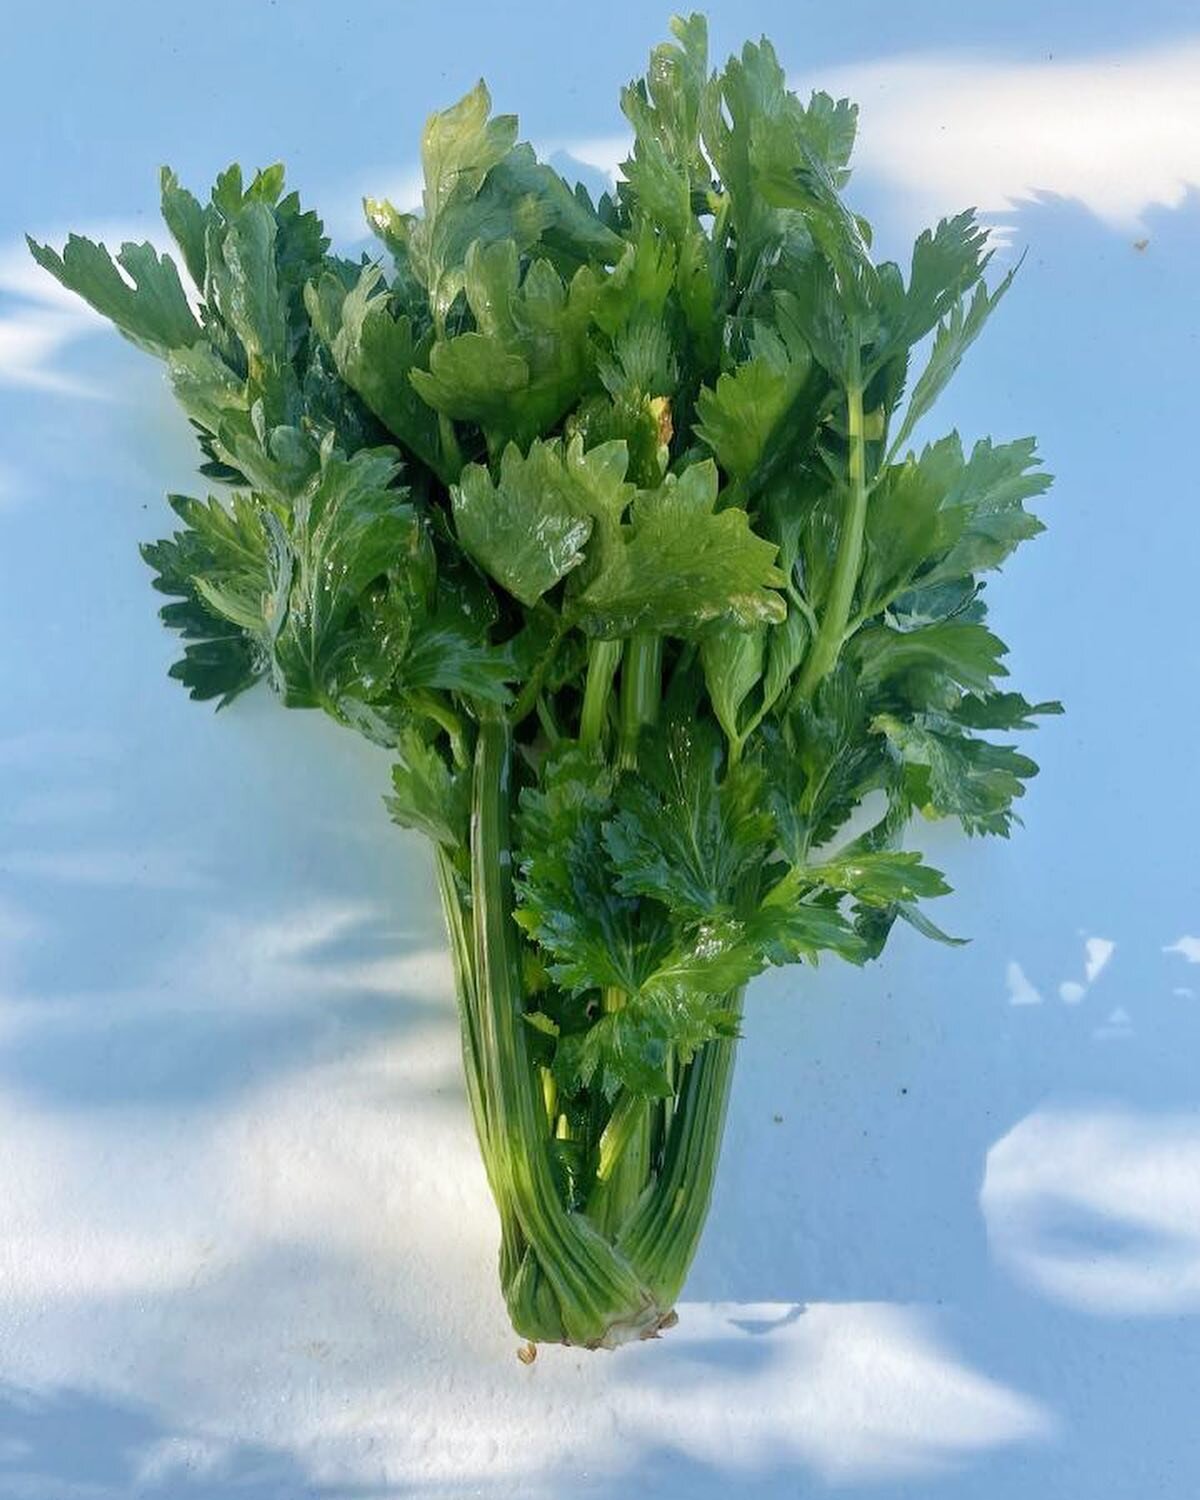 You&rsquo;ve never truly tasted the genius of celery until you&rsquo;ve tried it straight from a local farm. Get ready to have your mind blown by the unbelievable flavor of these #methowgrown beauties from @groovyveggiefarm ! 
..
Limited supply, get 